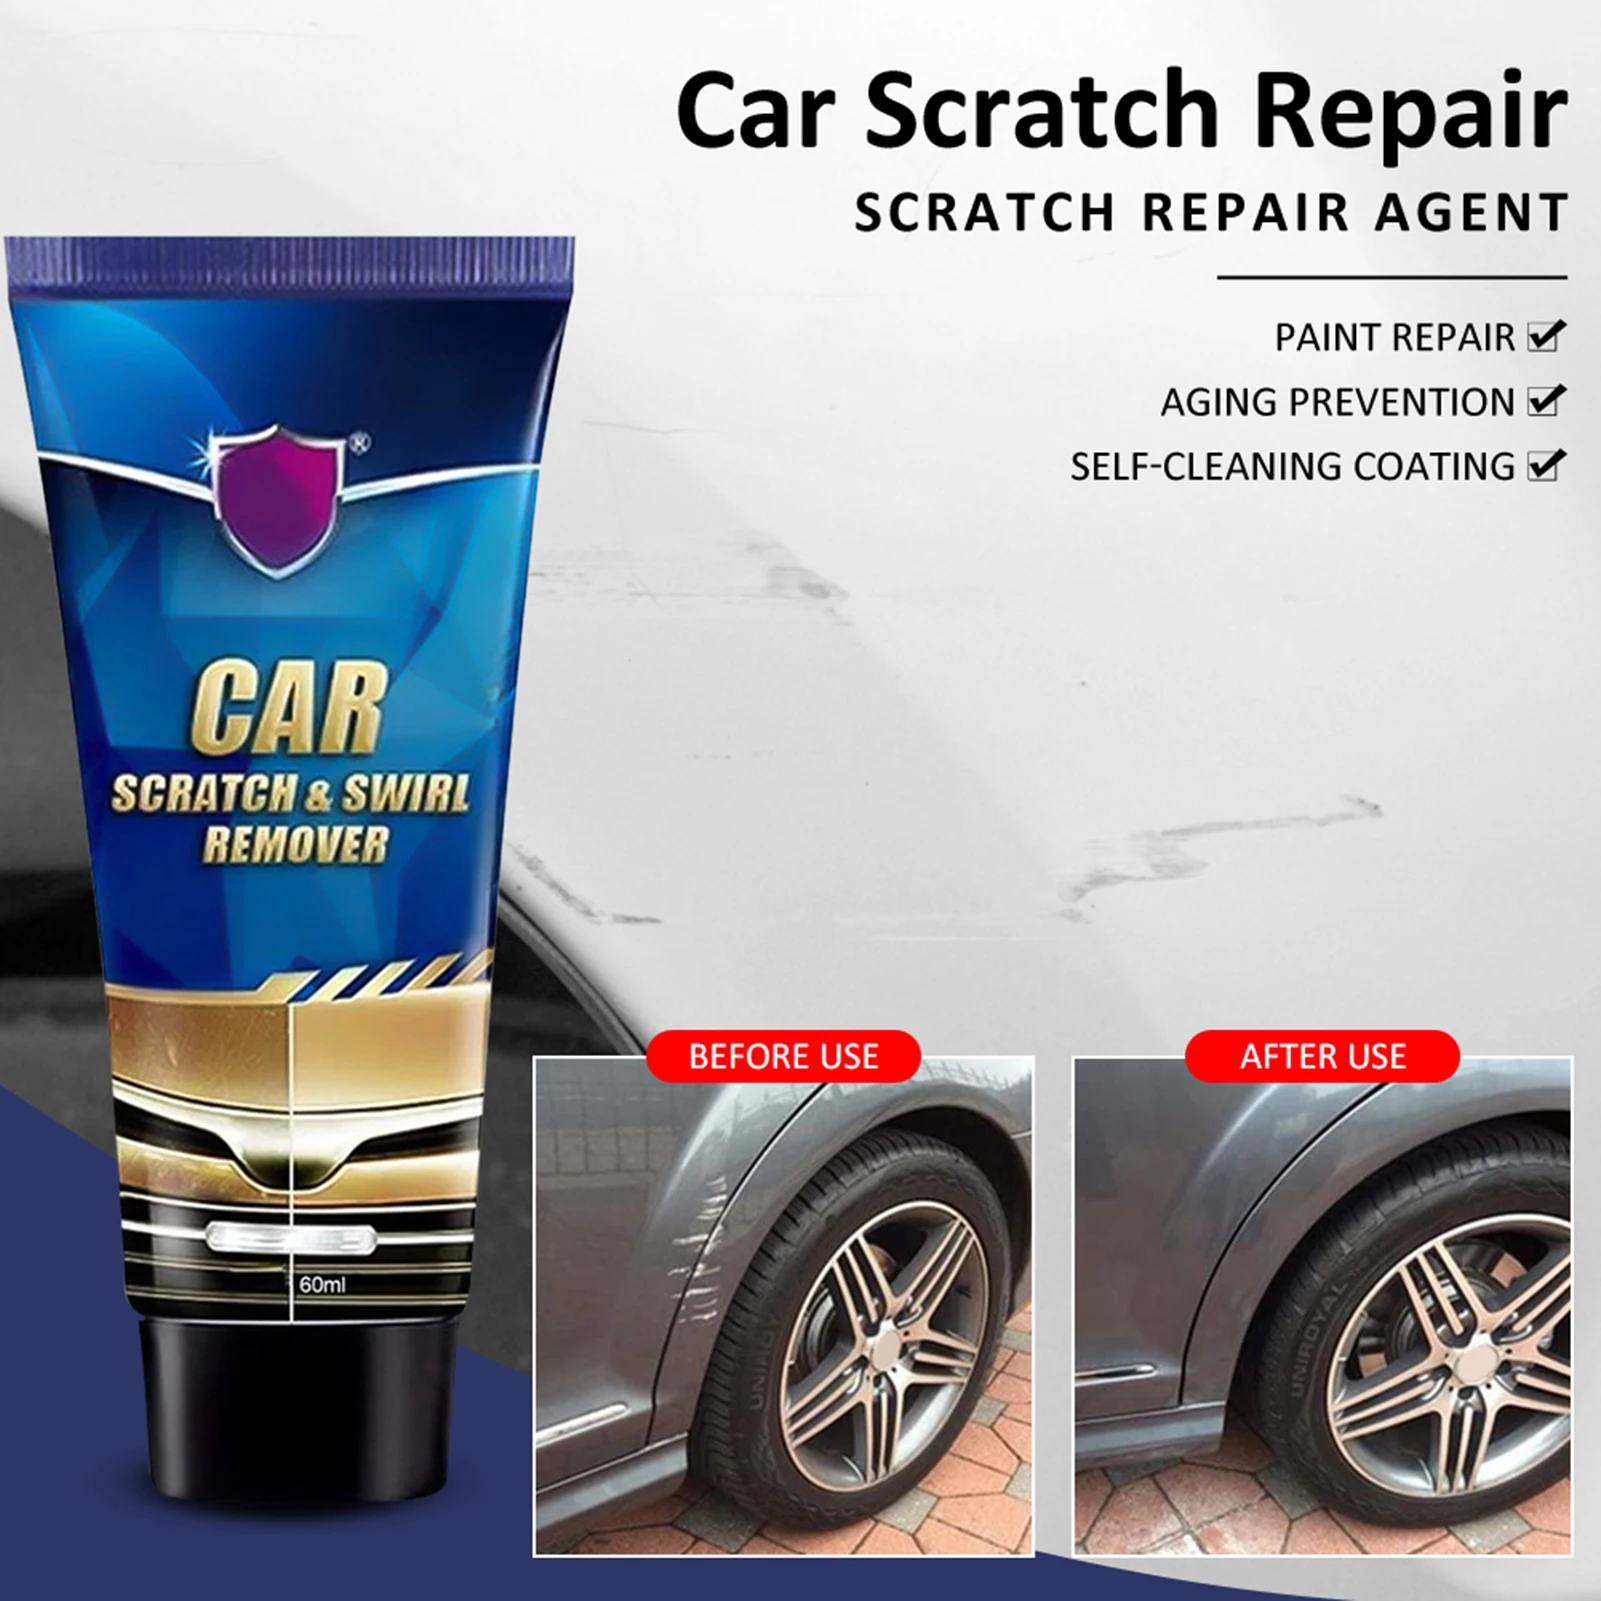 meguiars scratchx Car Scratches Remover Cream Car Scratches Repair Effective Polish And Paint Restorer Rubbing Compound Car Styling Accessories turtle wax ice